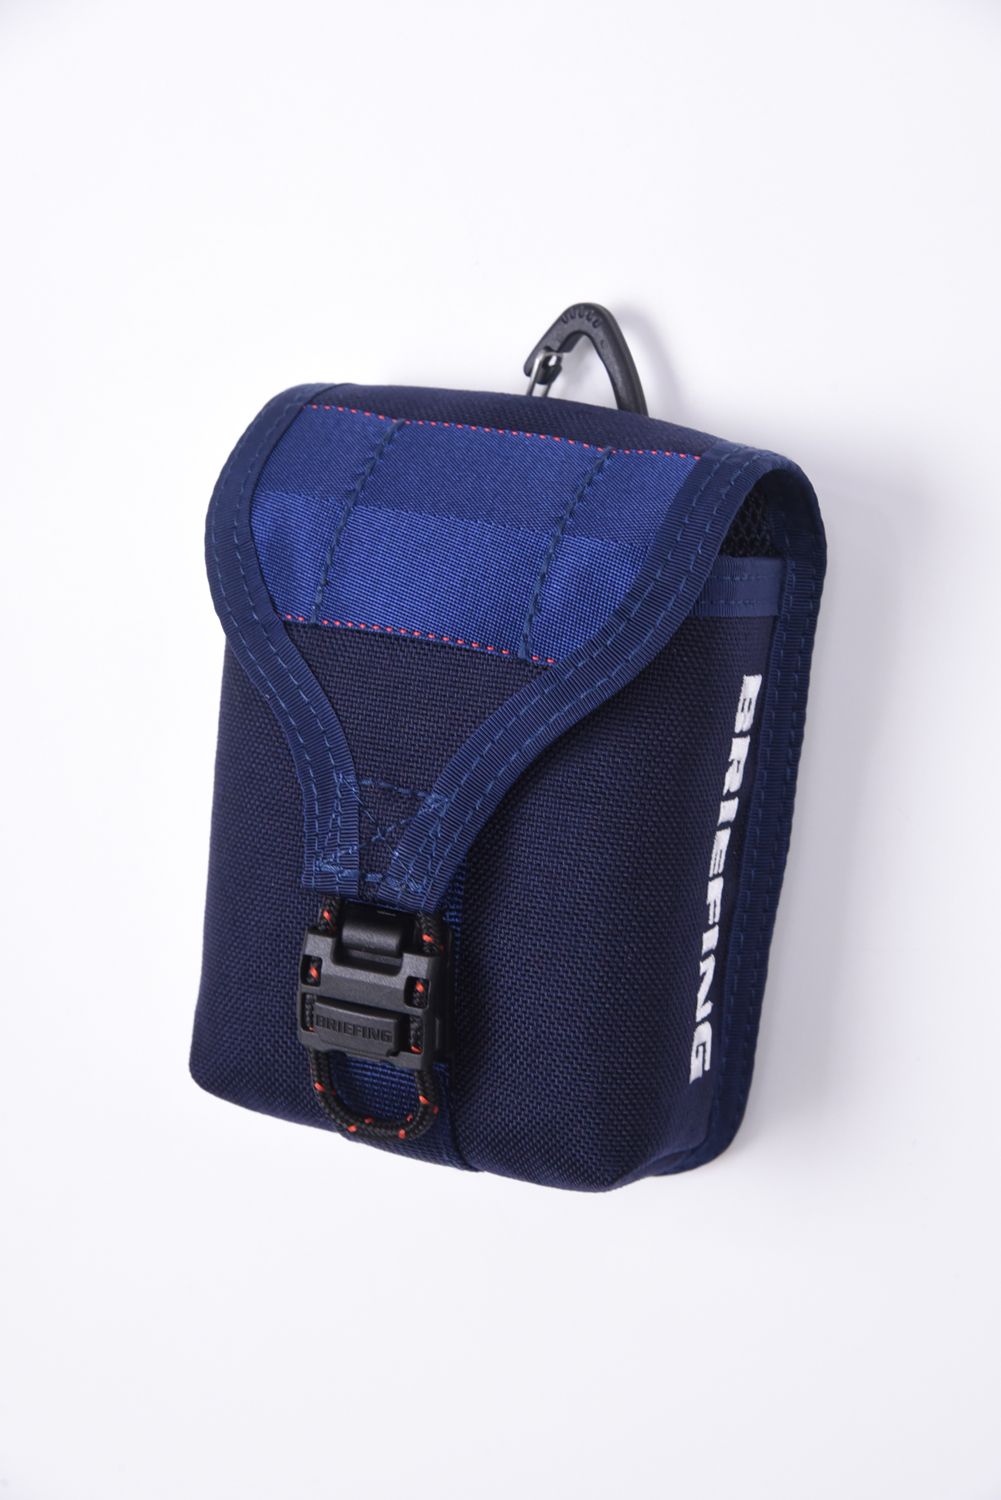 BRIEFING - 【STANDARD SERIES】 SCOPE BOX POUCH 1000D / スコープ